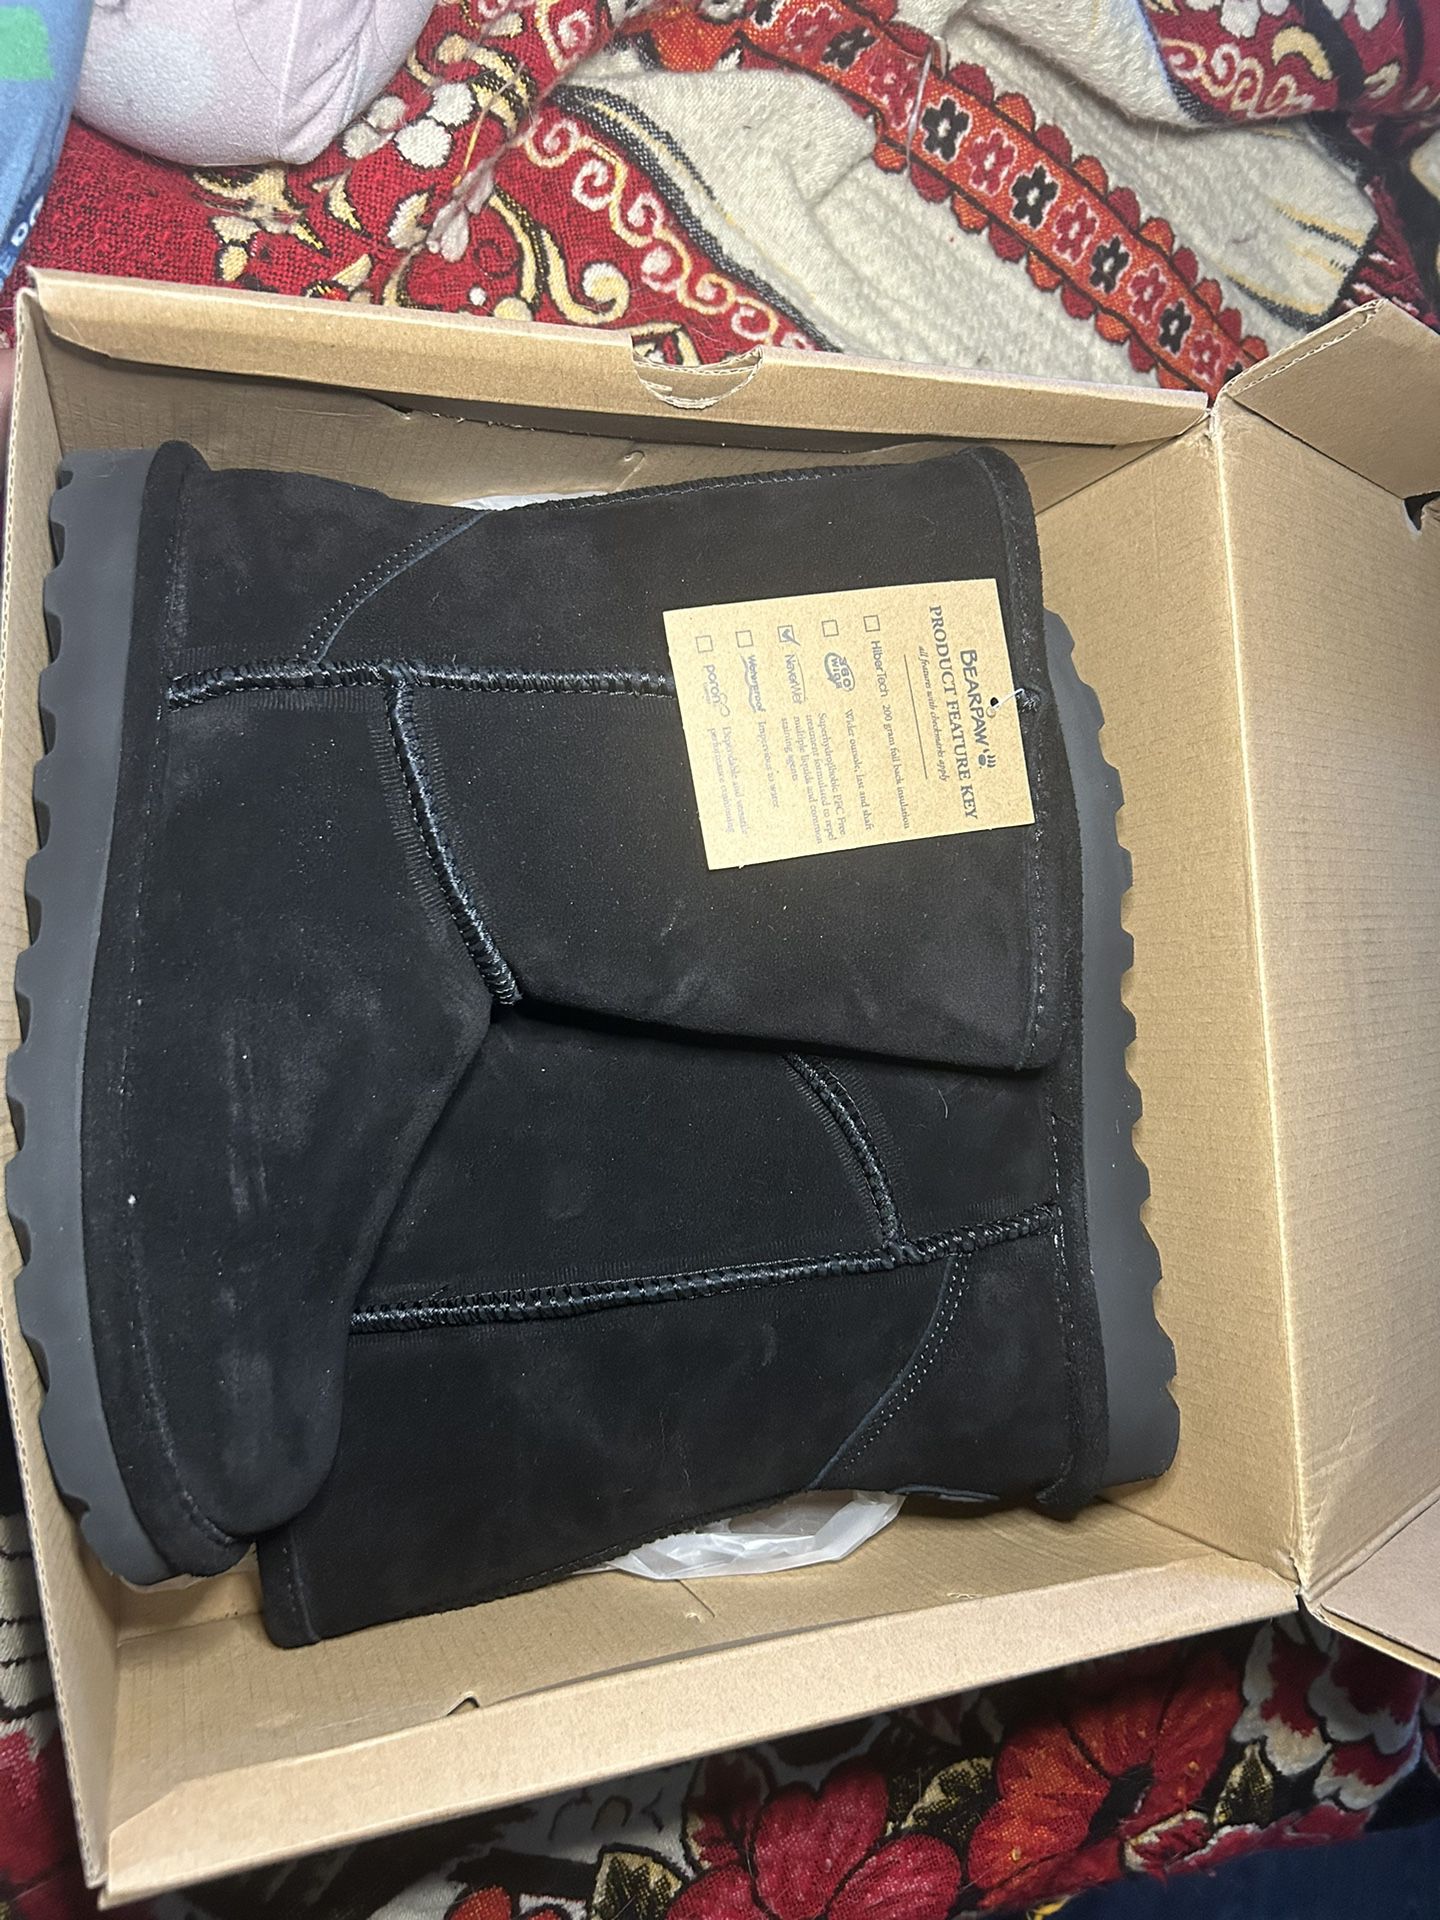 Bear Paw Boots